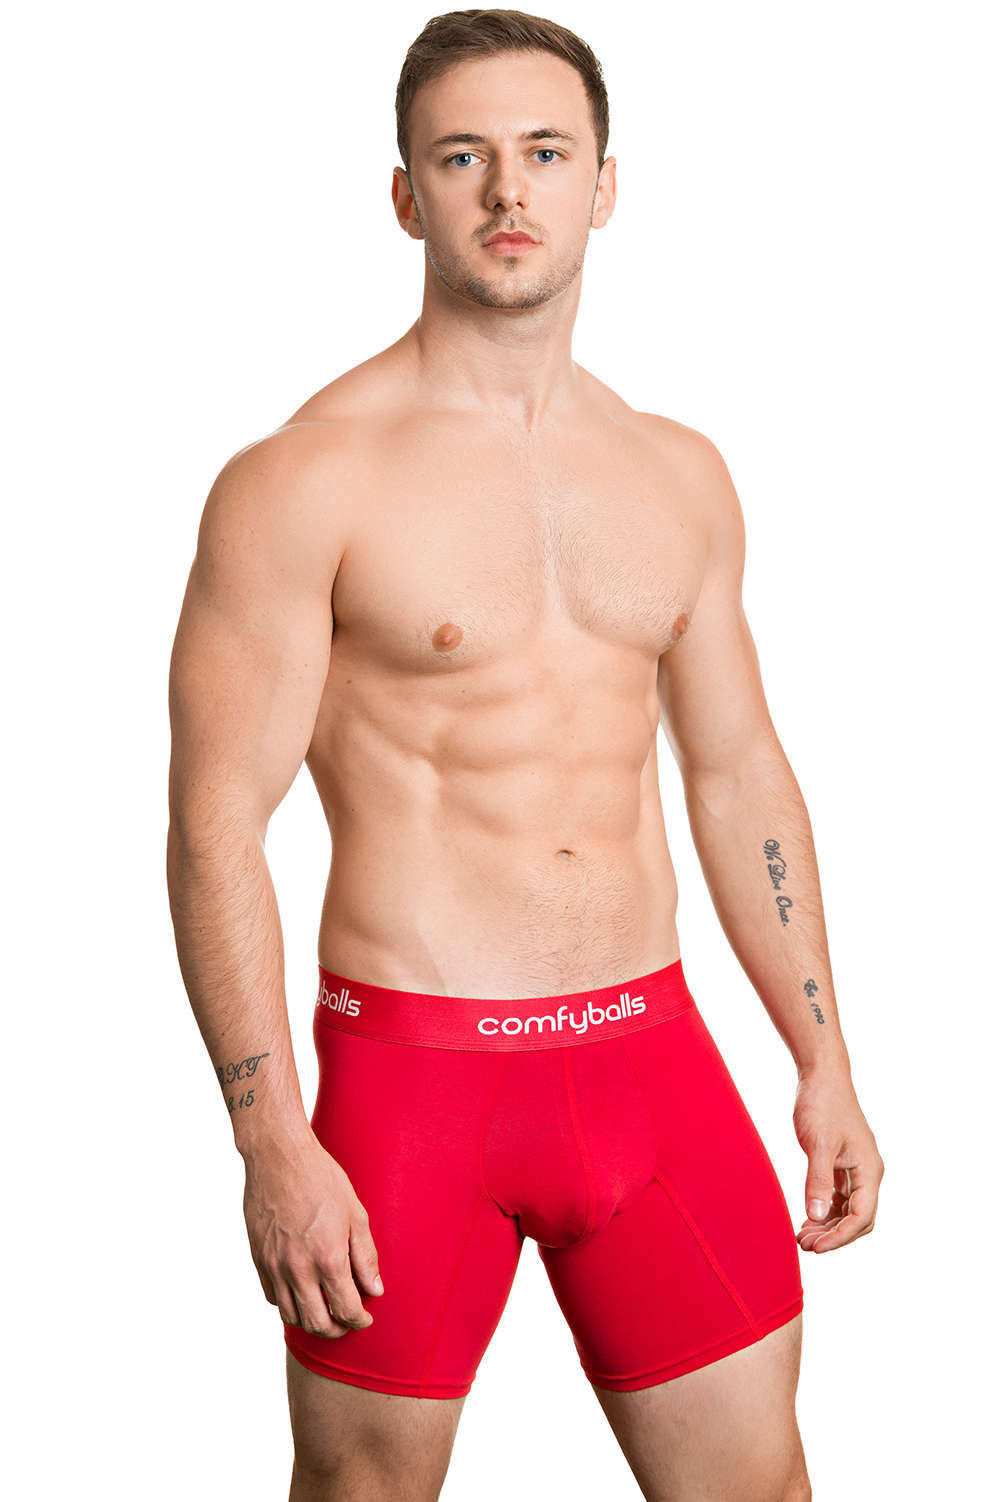 comfyballs long cotton boxer shorts in red